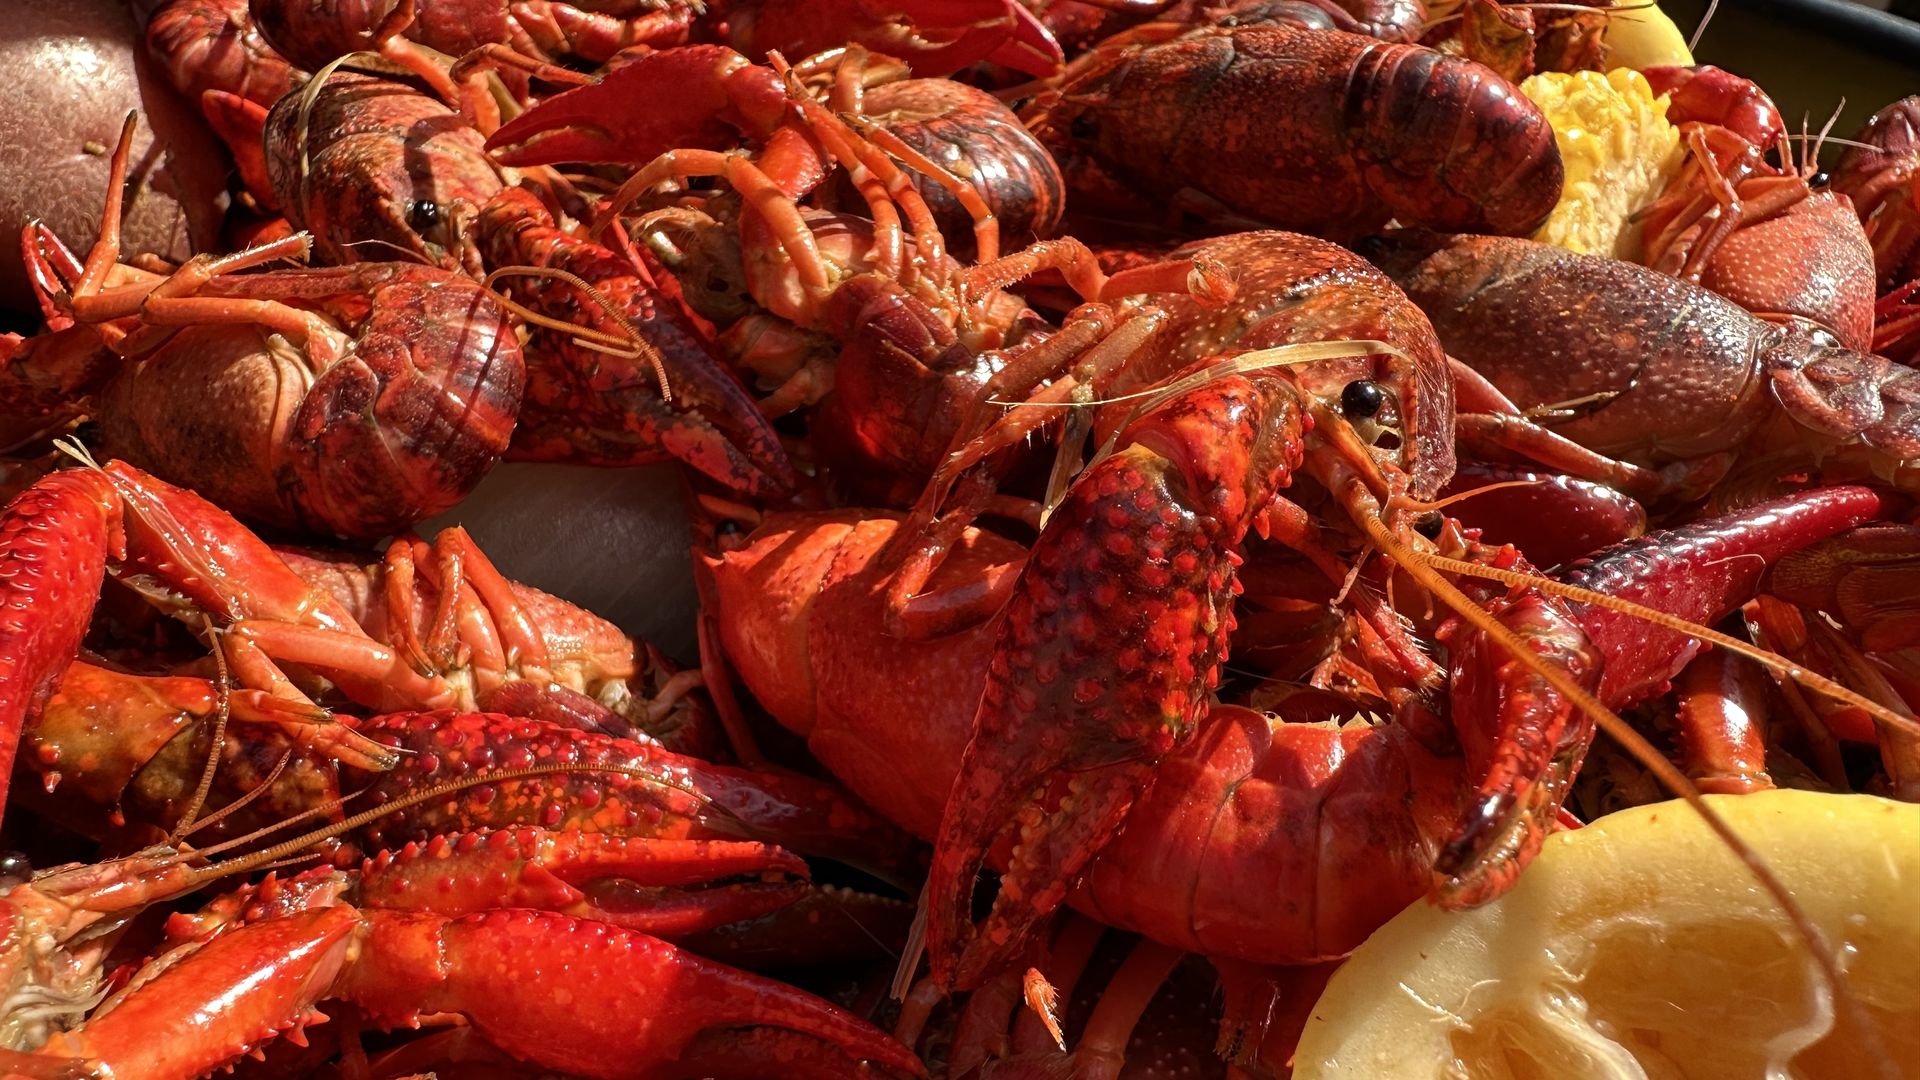 A pile of boiled crawfish, lemons, potatoes and garlic are ready to eat on a tray